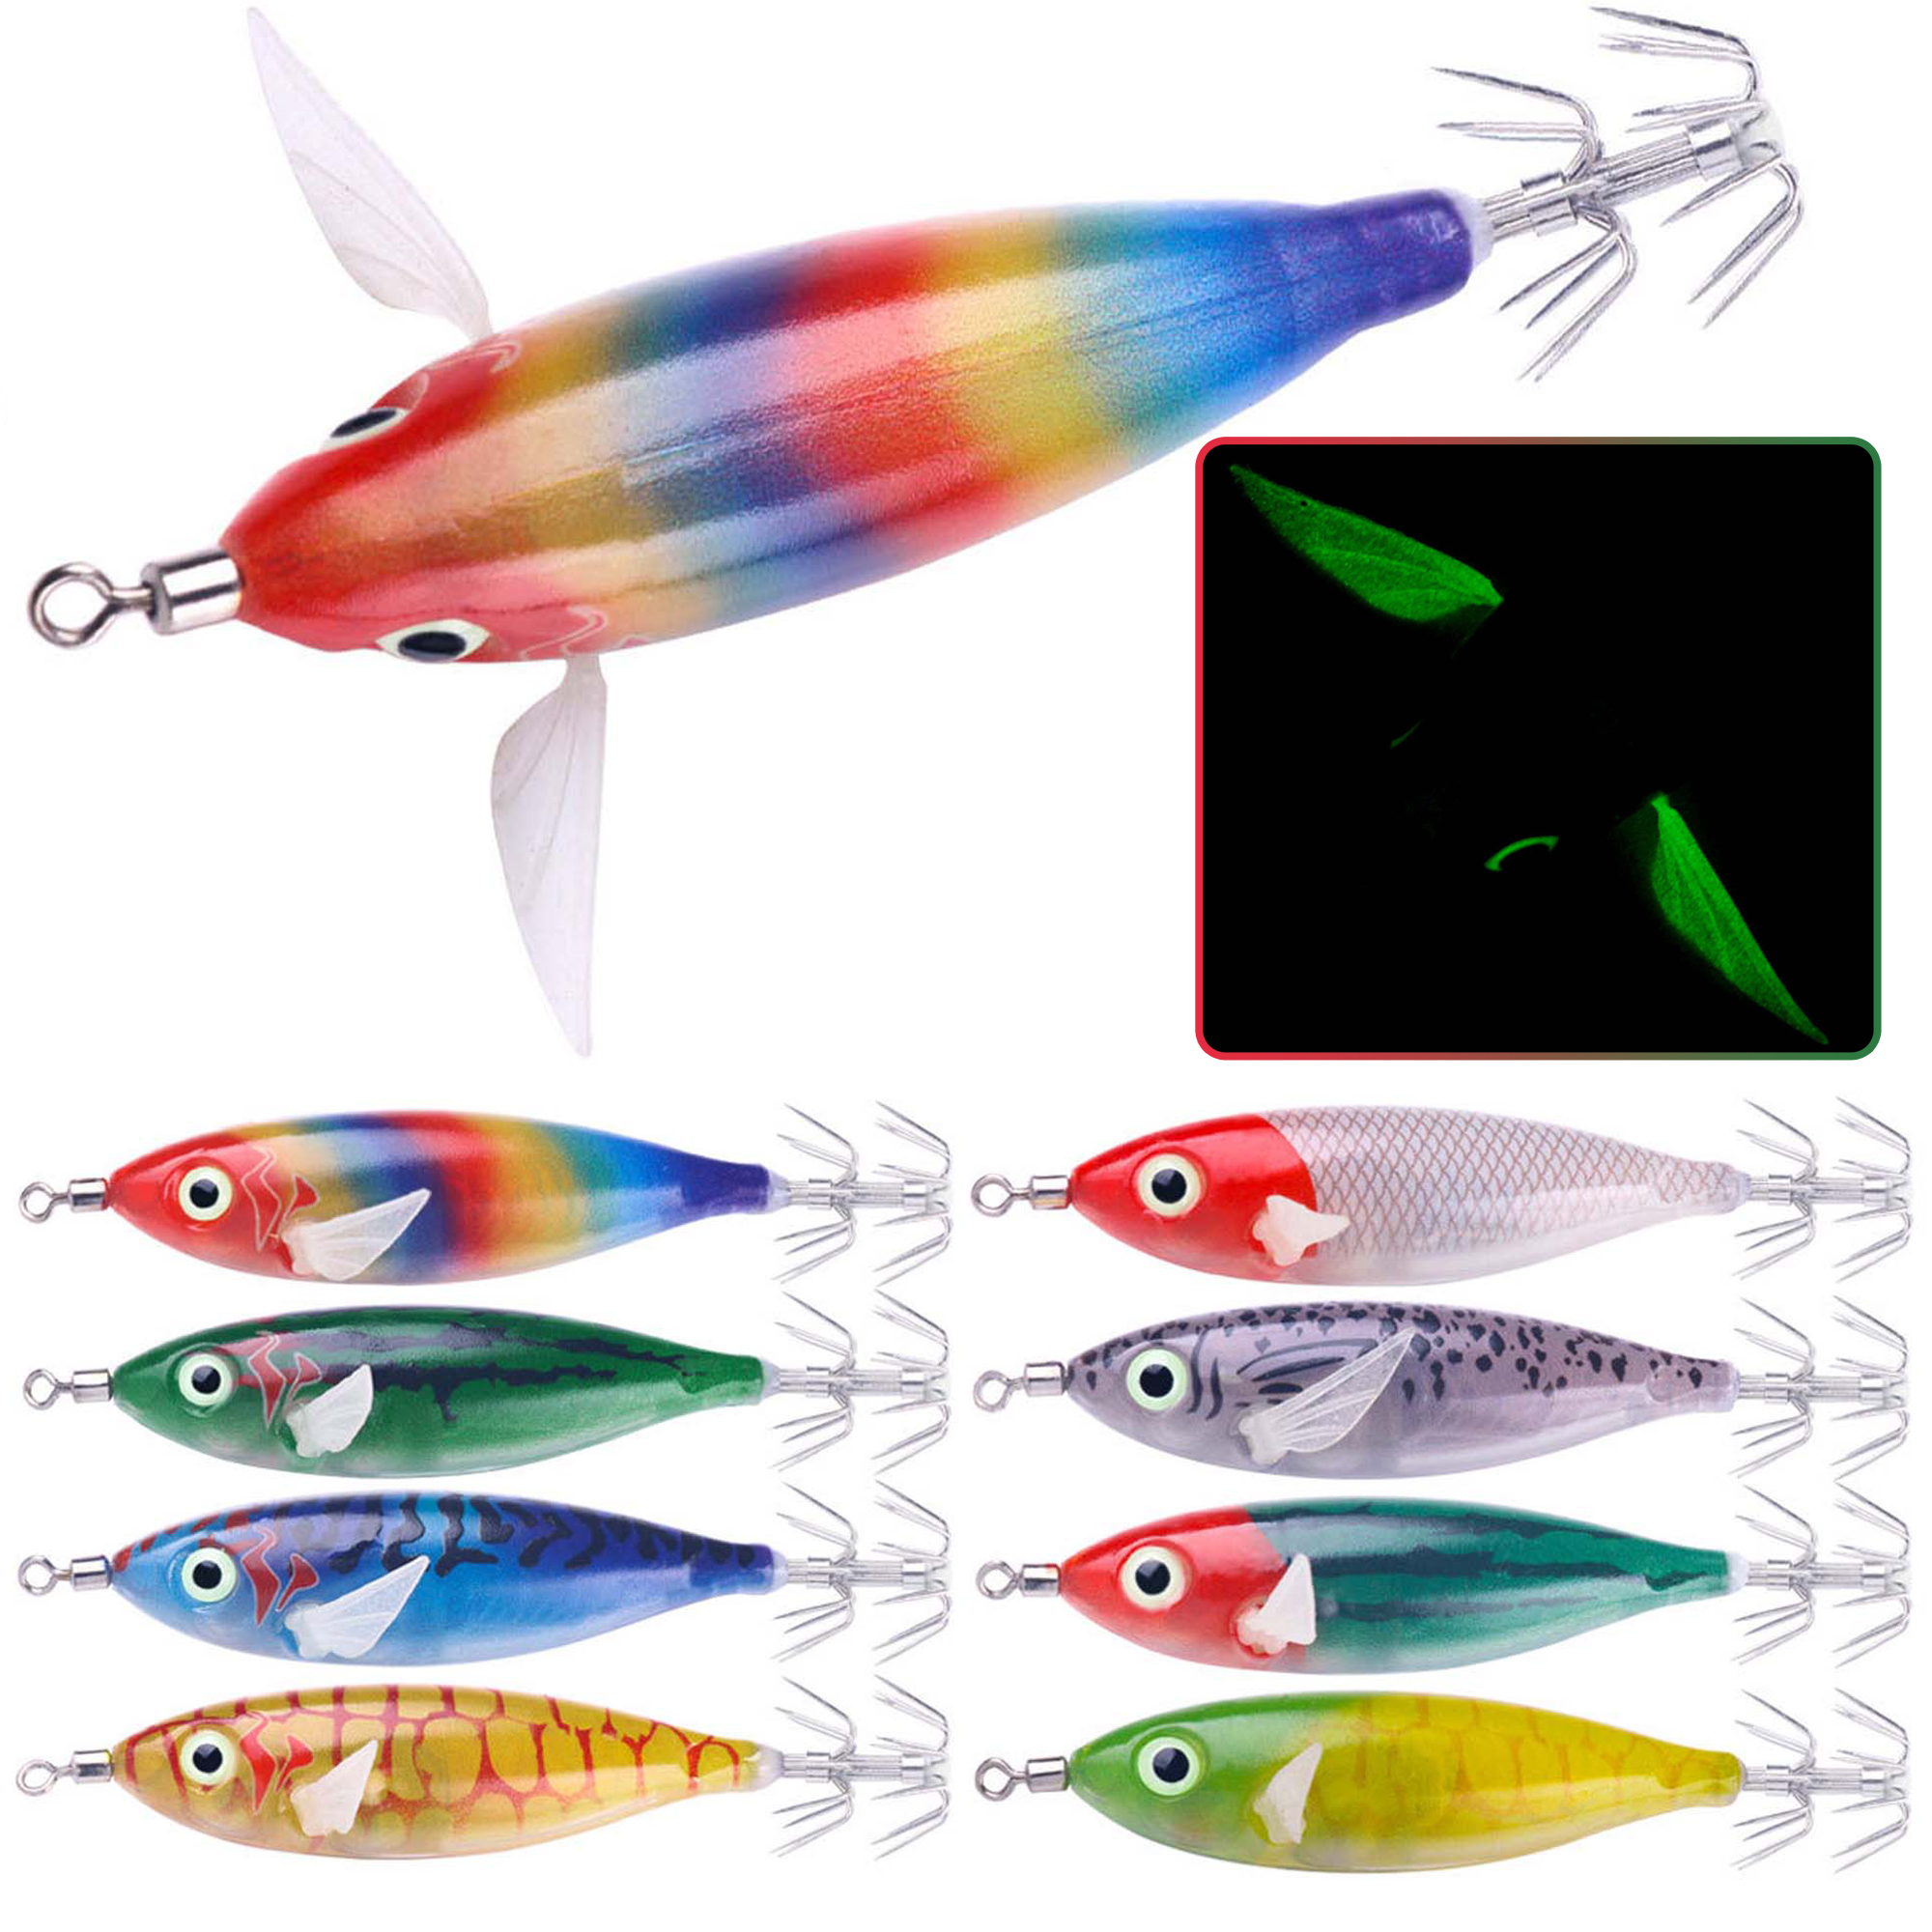 FREE FISHER 8pcs/Lot Fishing Squids 6g 8cm Luminous Octopus Cuttlefish Baits Sea Fishing Shrimps Lures for Saltwater Artificial Jig Hooks